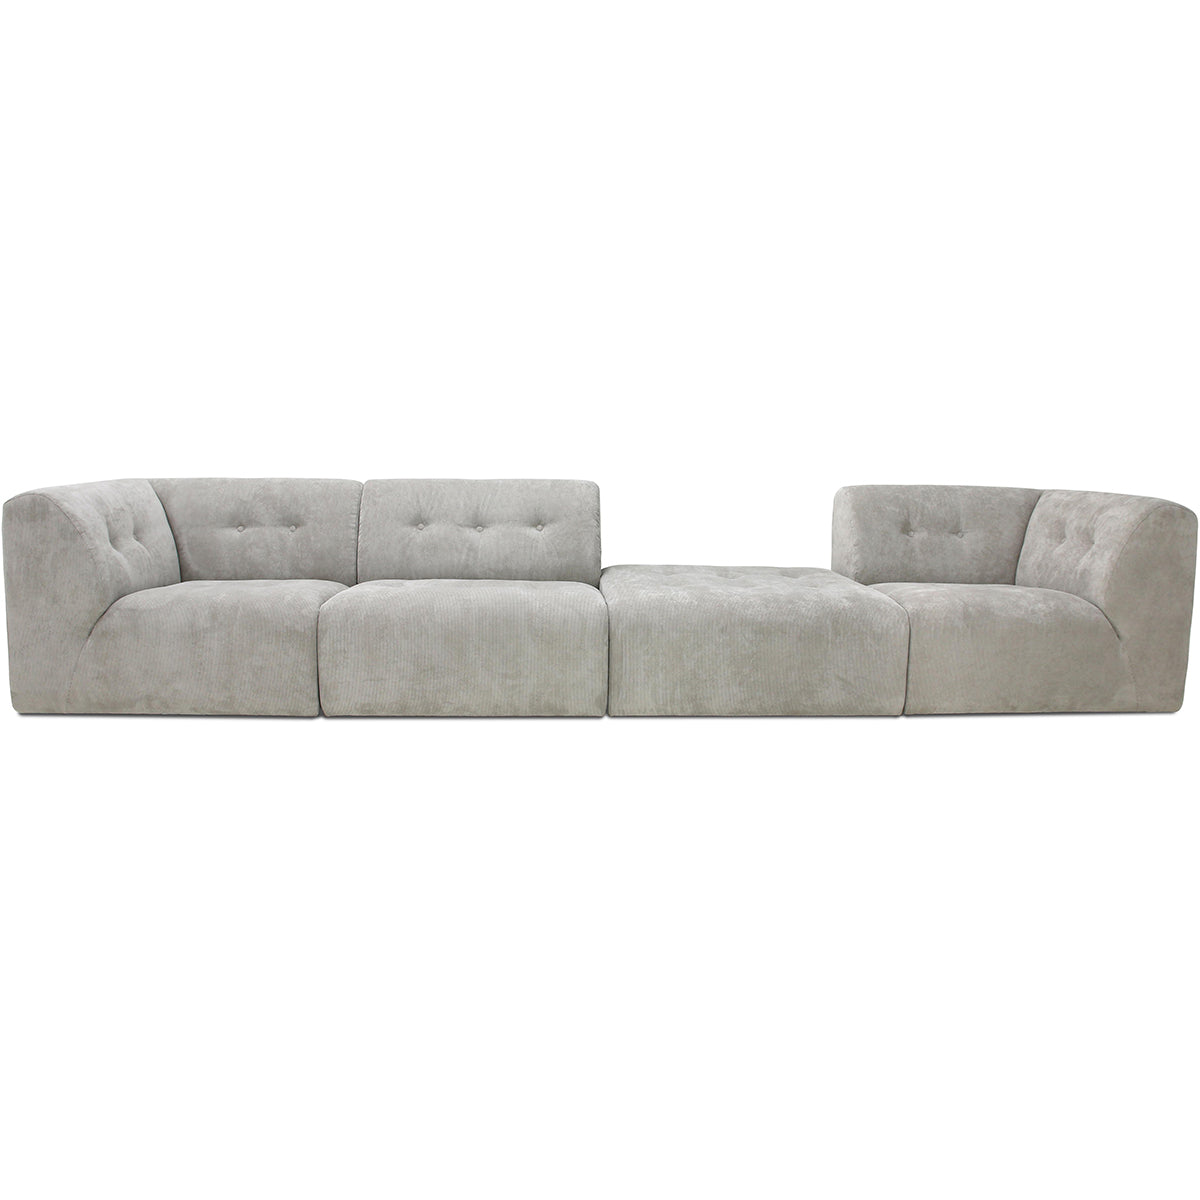 HKliving vint couch: element middle, corduroy rib, cream